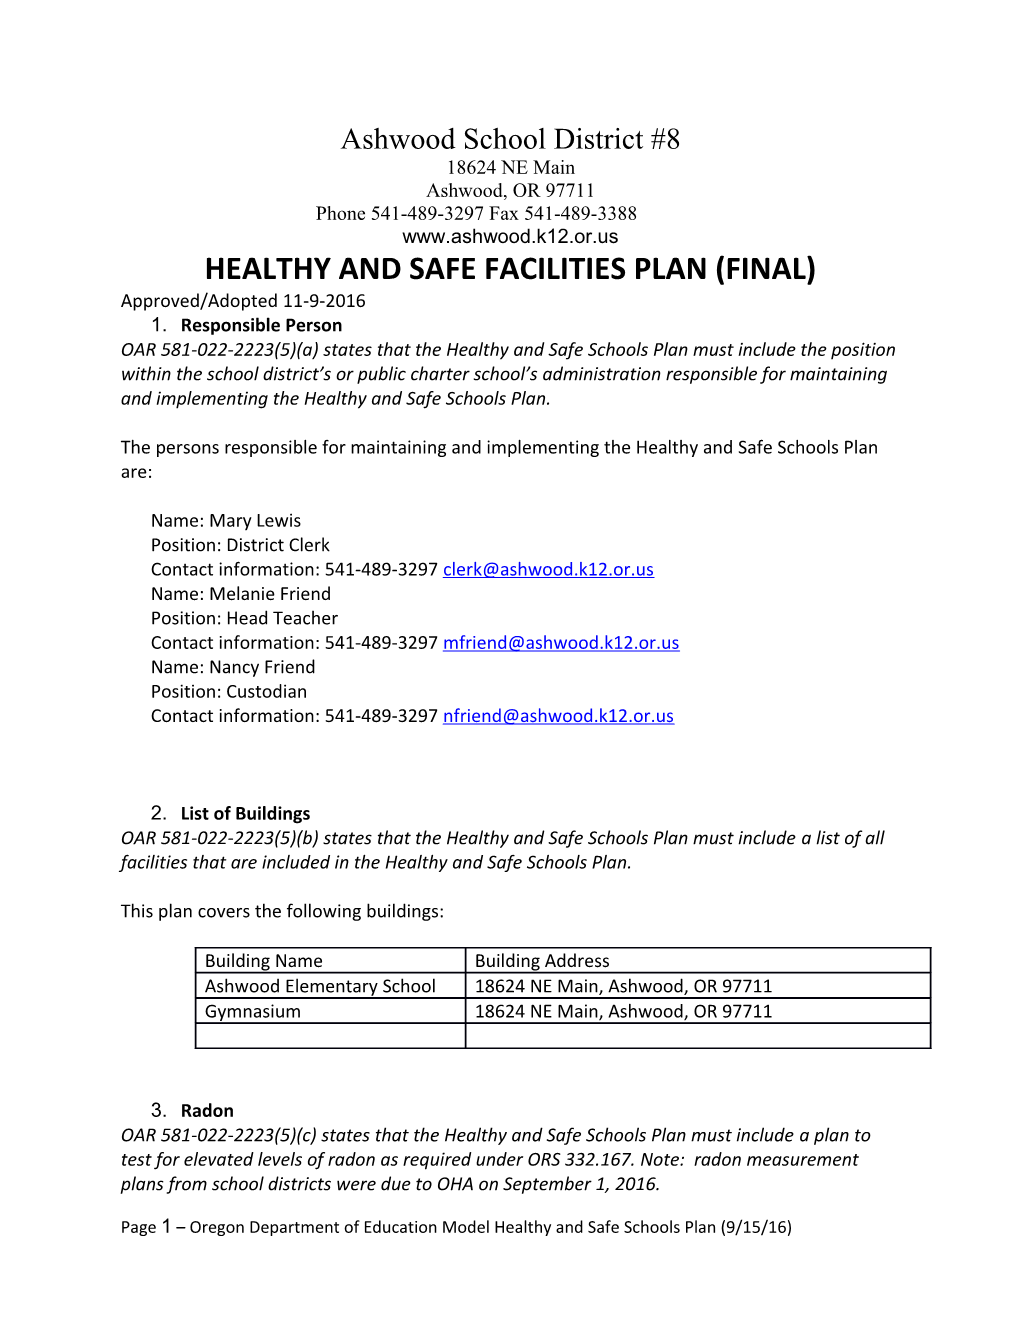 Healthy and Safe Facilities Plan (Final)